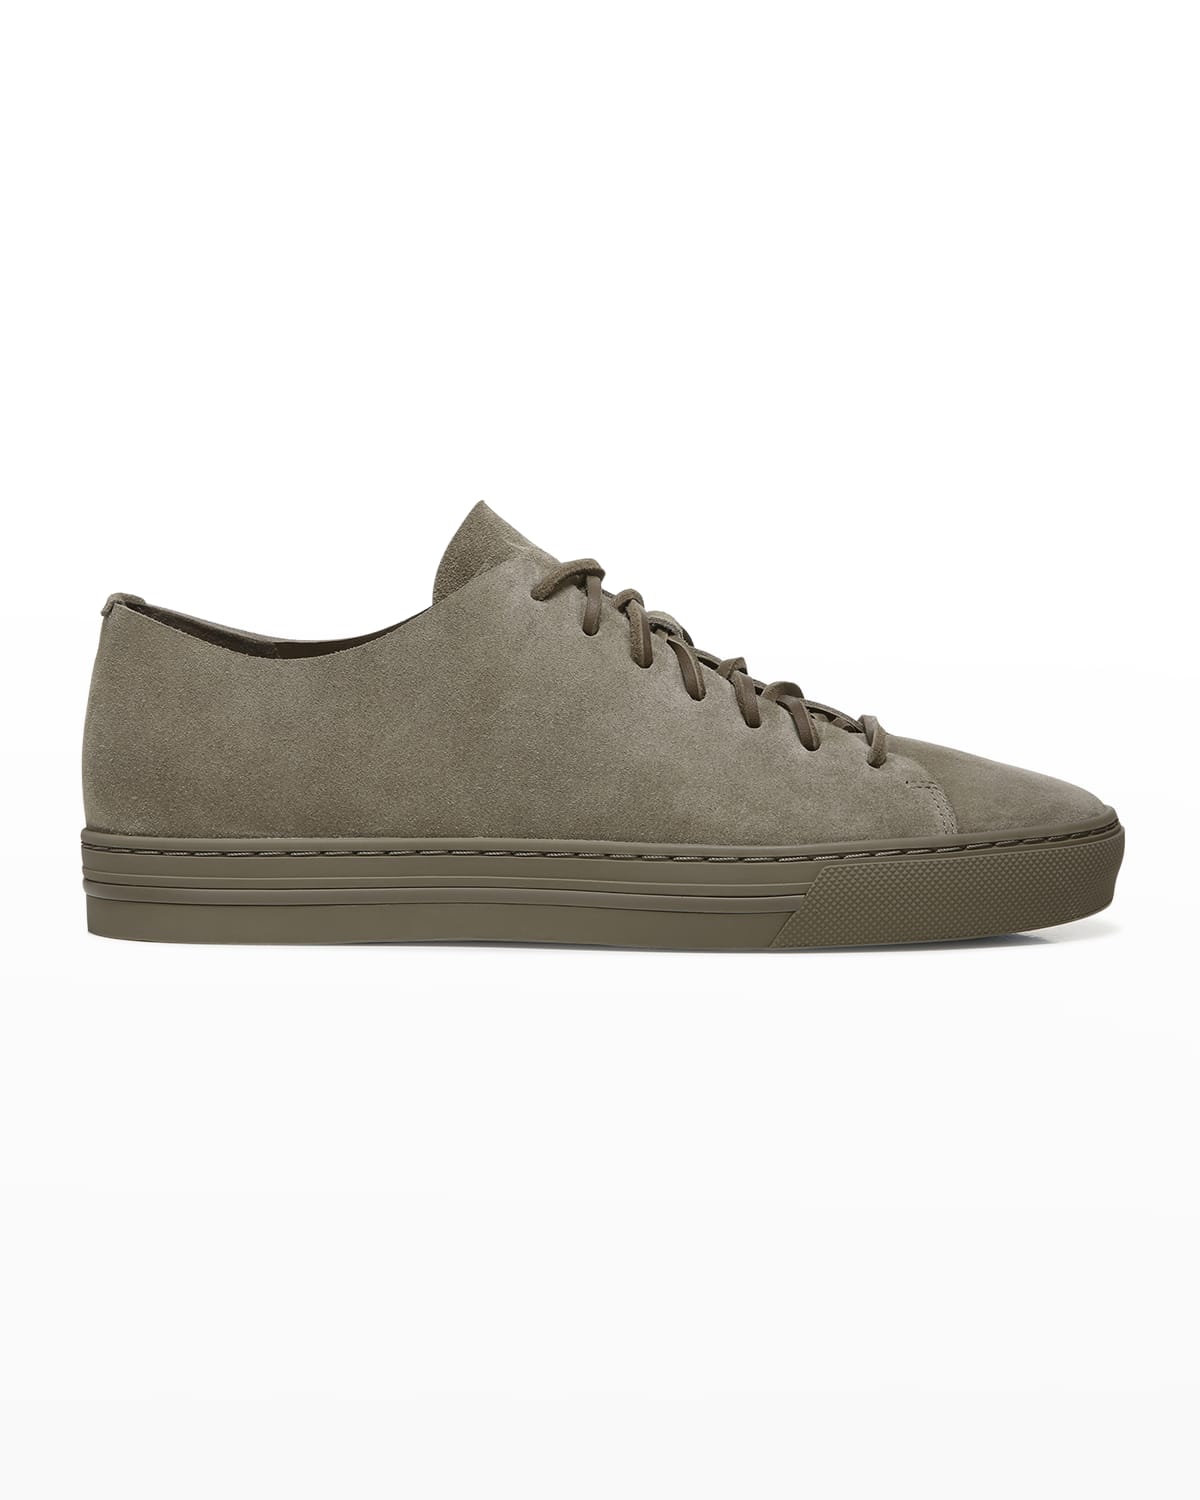 VINCE MEN'S COLLINS SUEDE TONE-ON-TONE LOW-TOP SNEAKERS